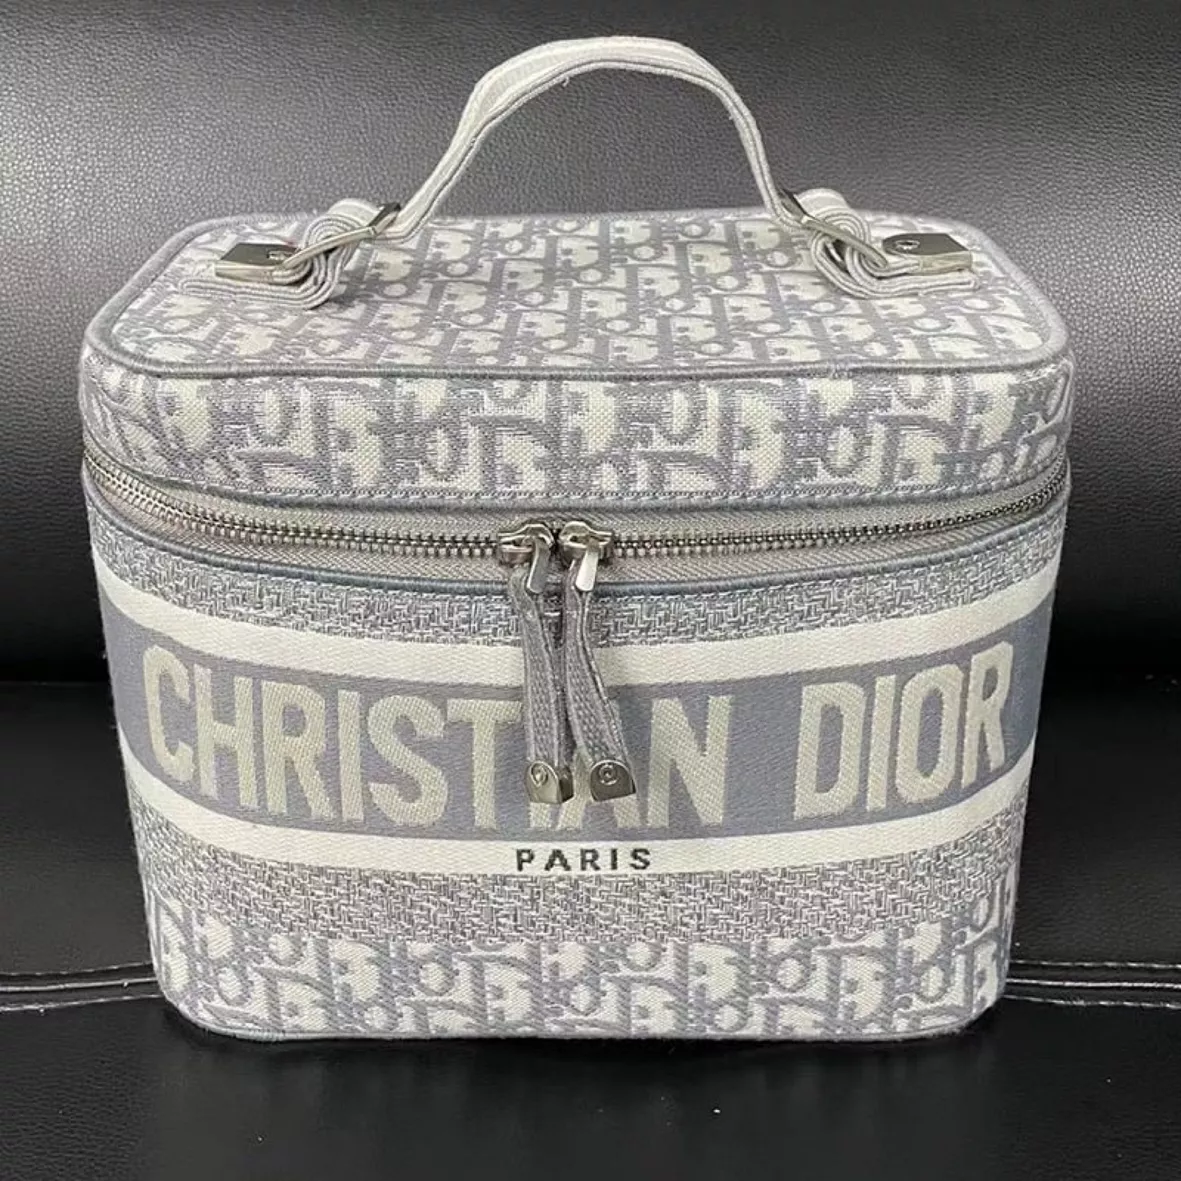 Dior offers its star bags in mini format!